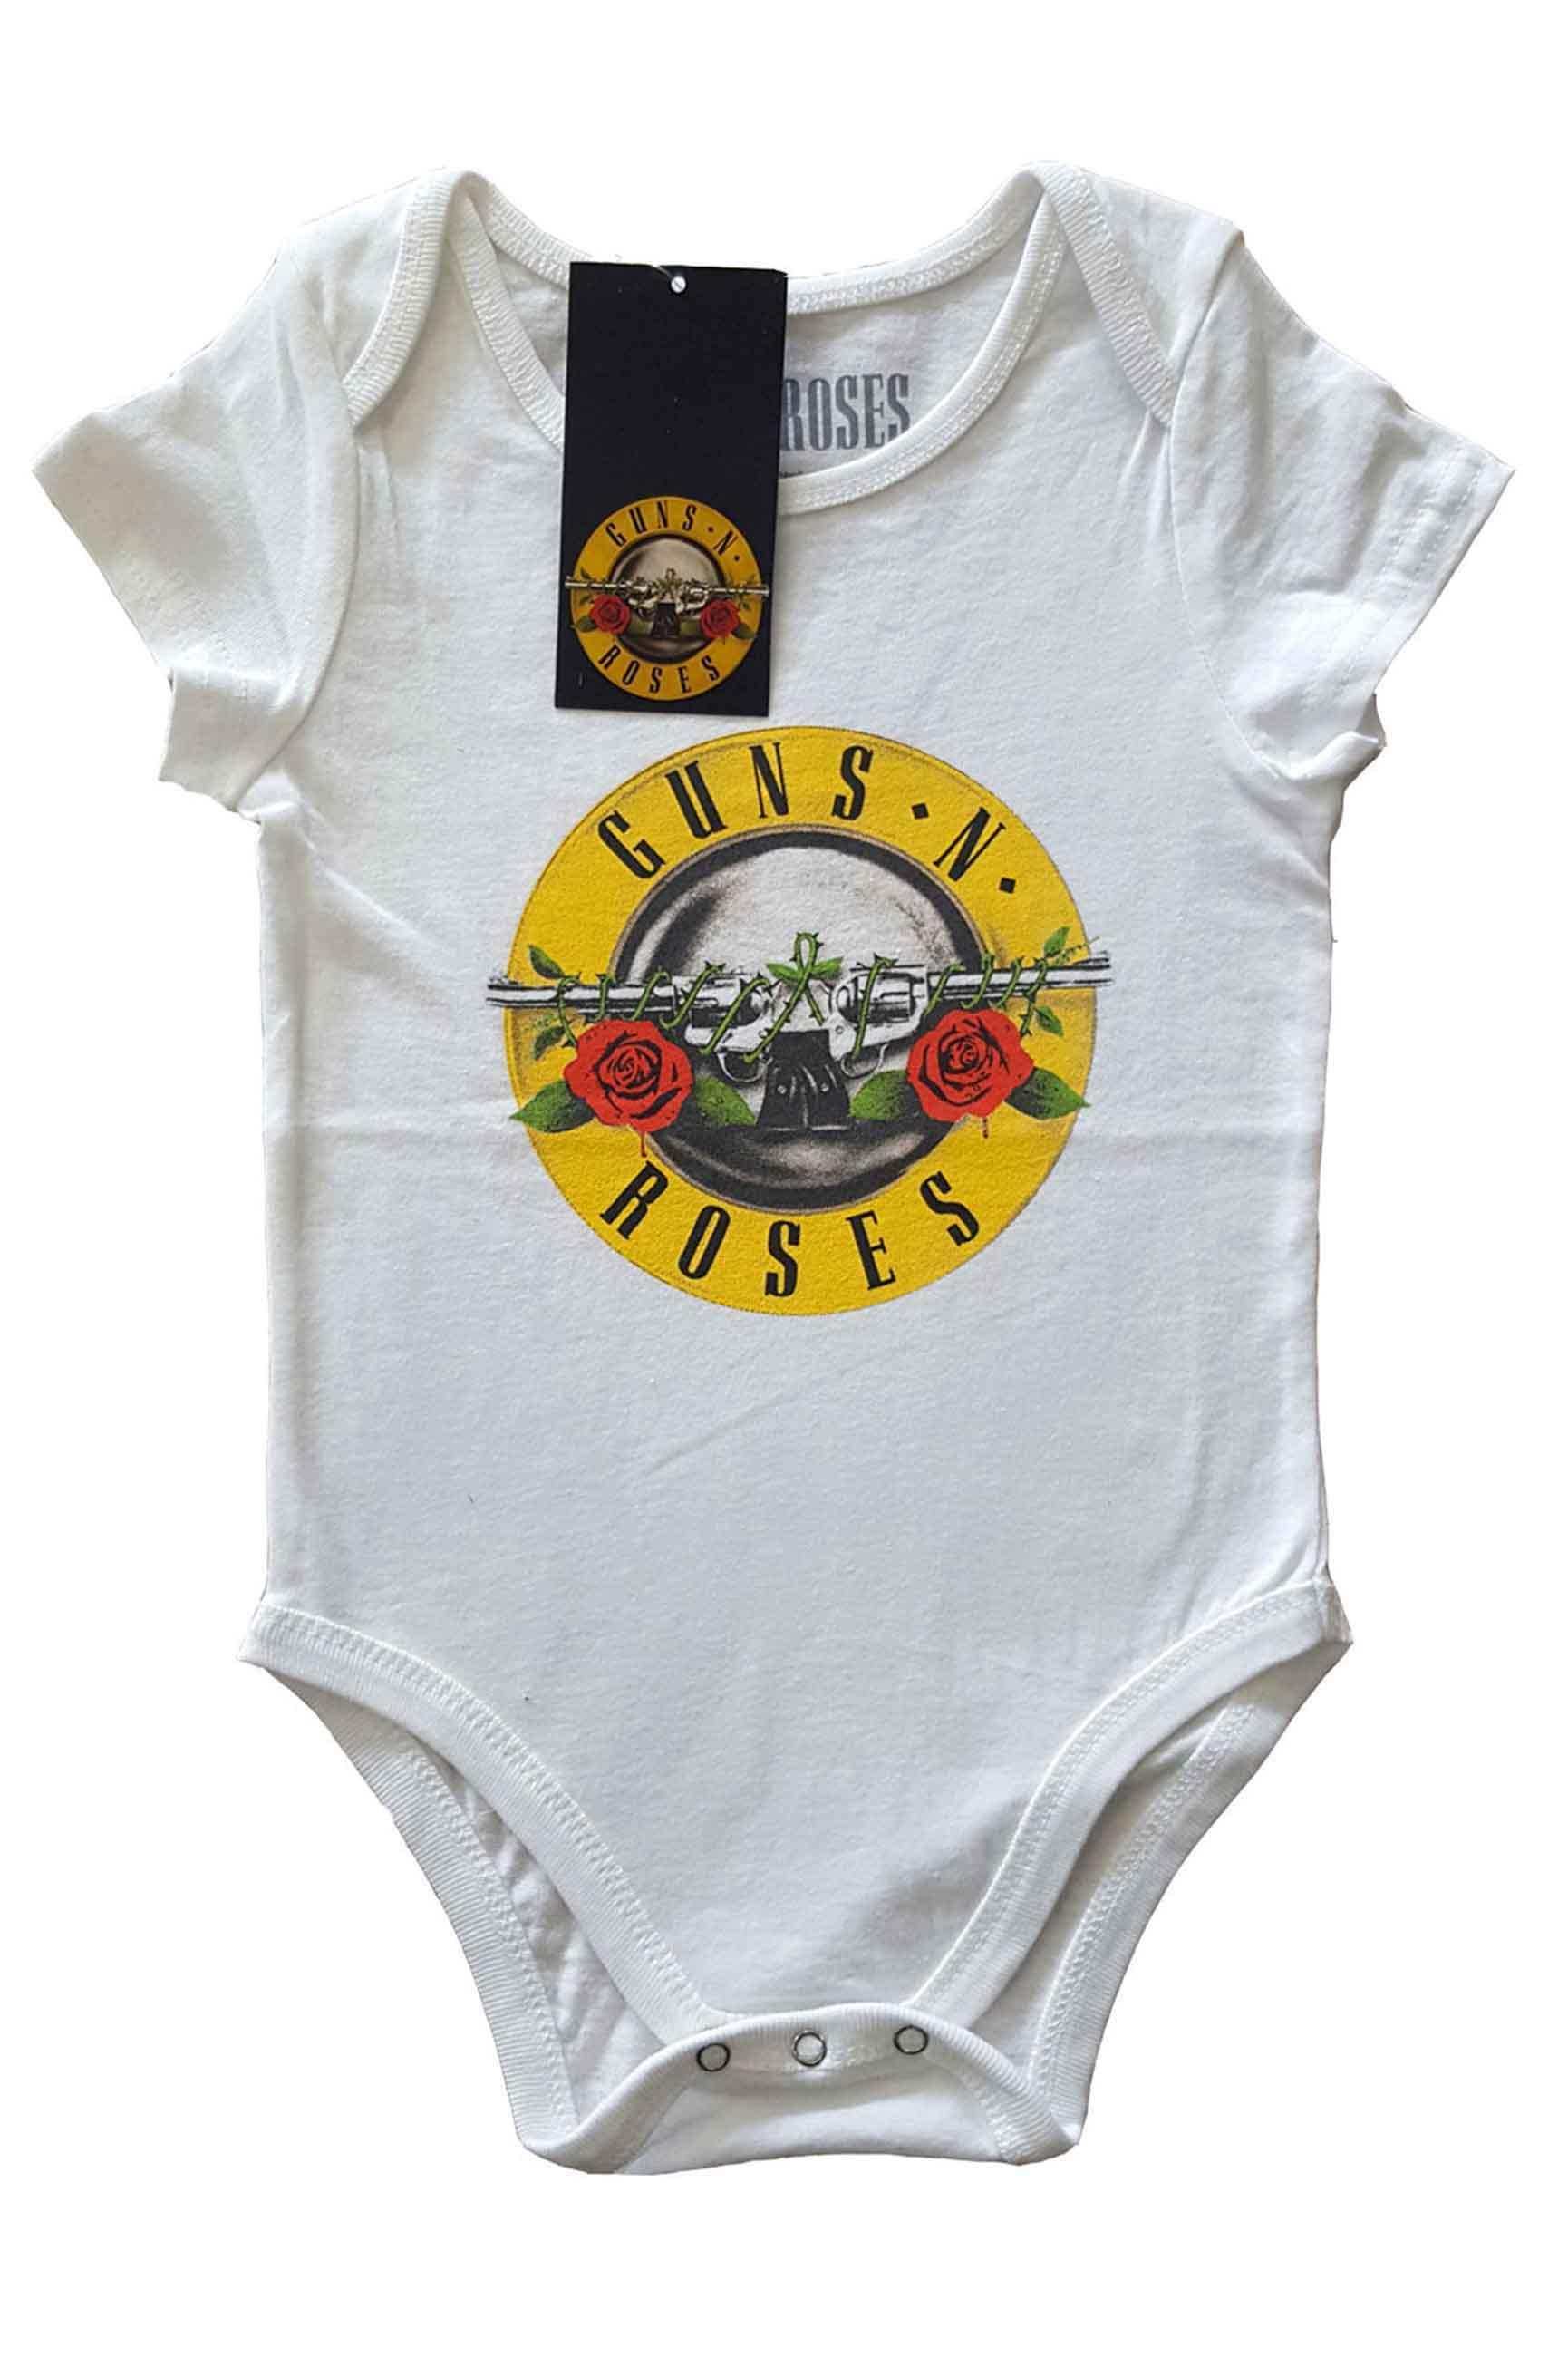 Guns N' Roses Baby Grow Classic Band Logo new Official White 0 to 24 Months